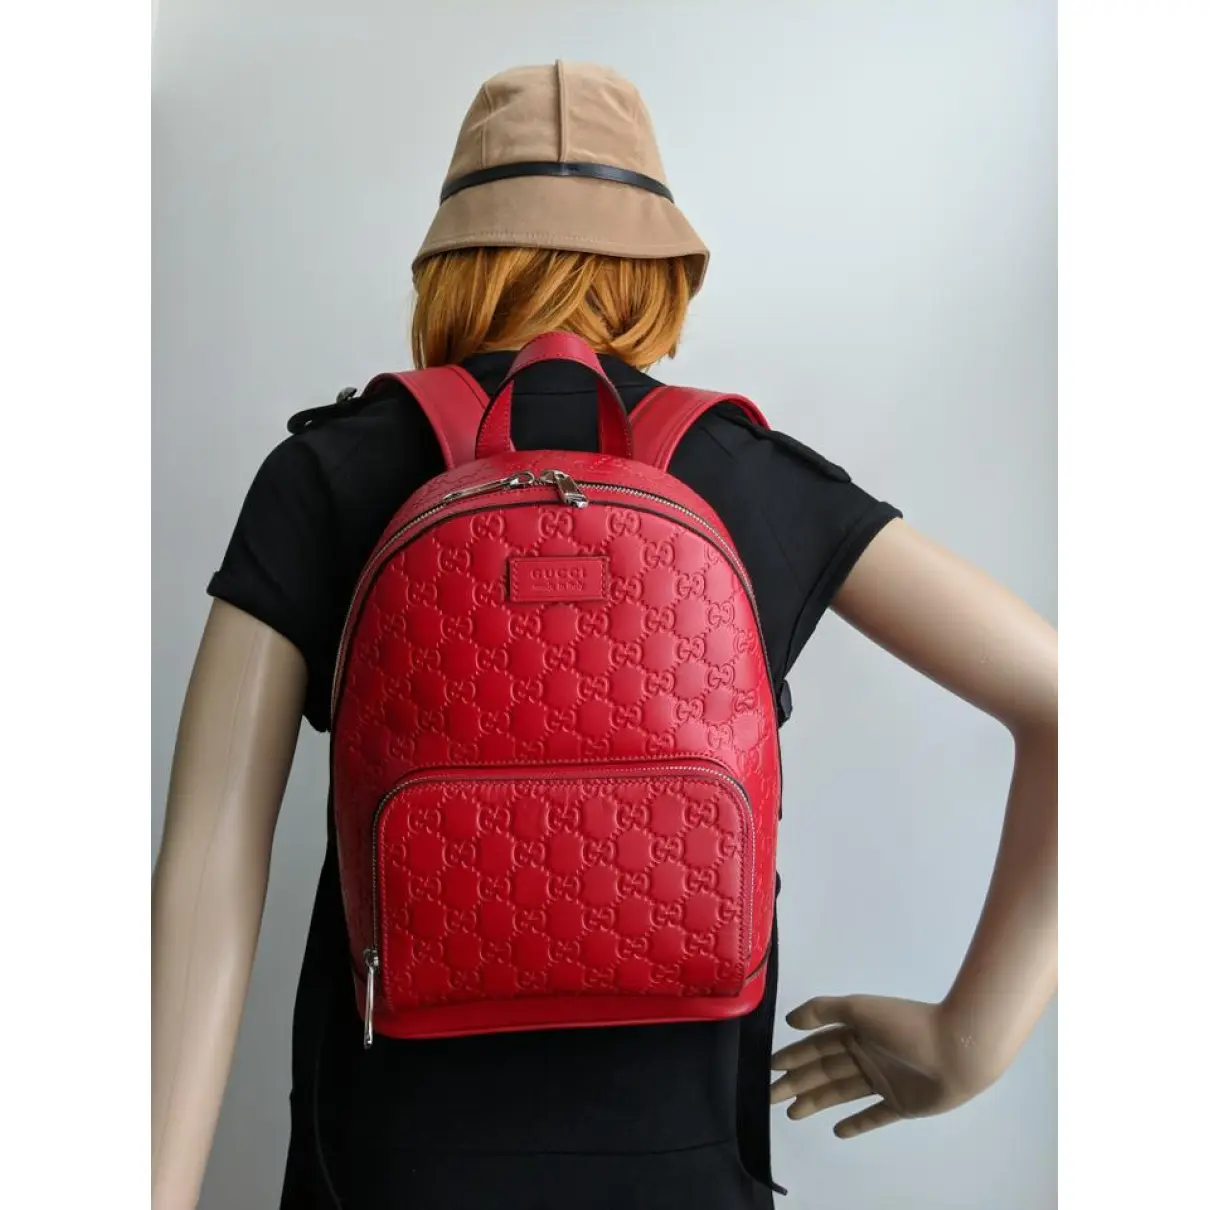 Buy Gucci Soho leather backpack online